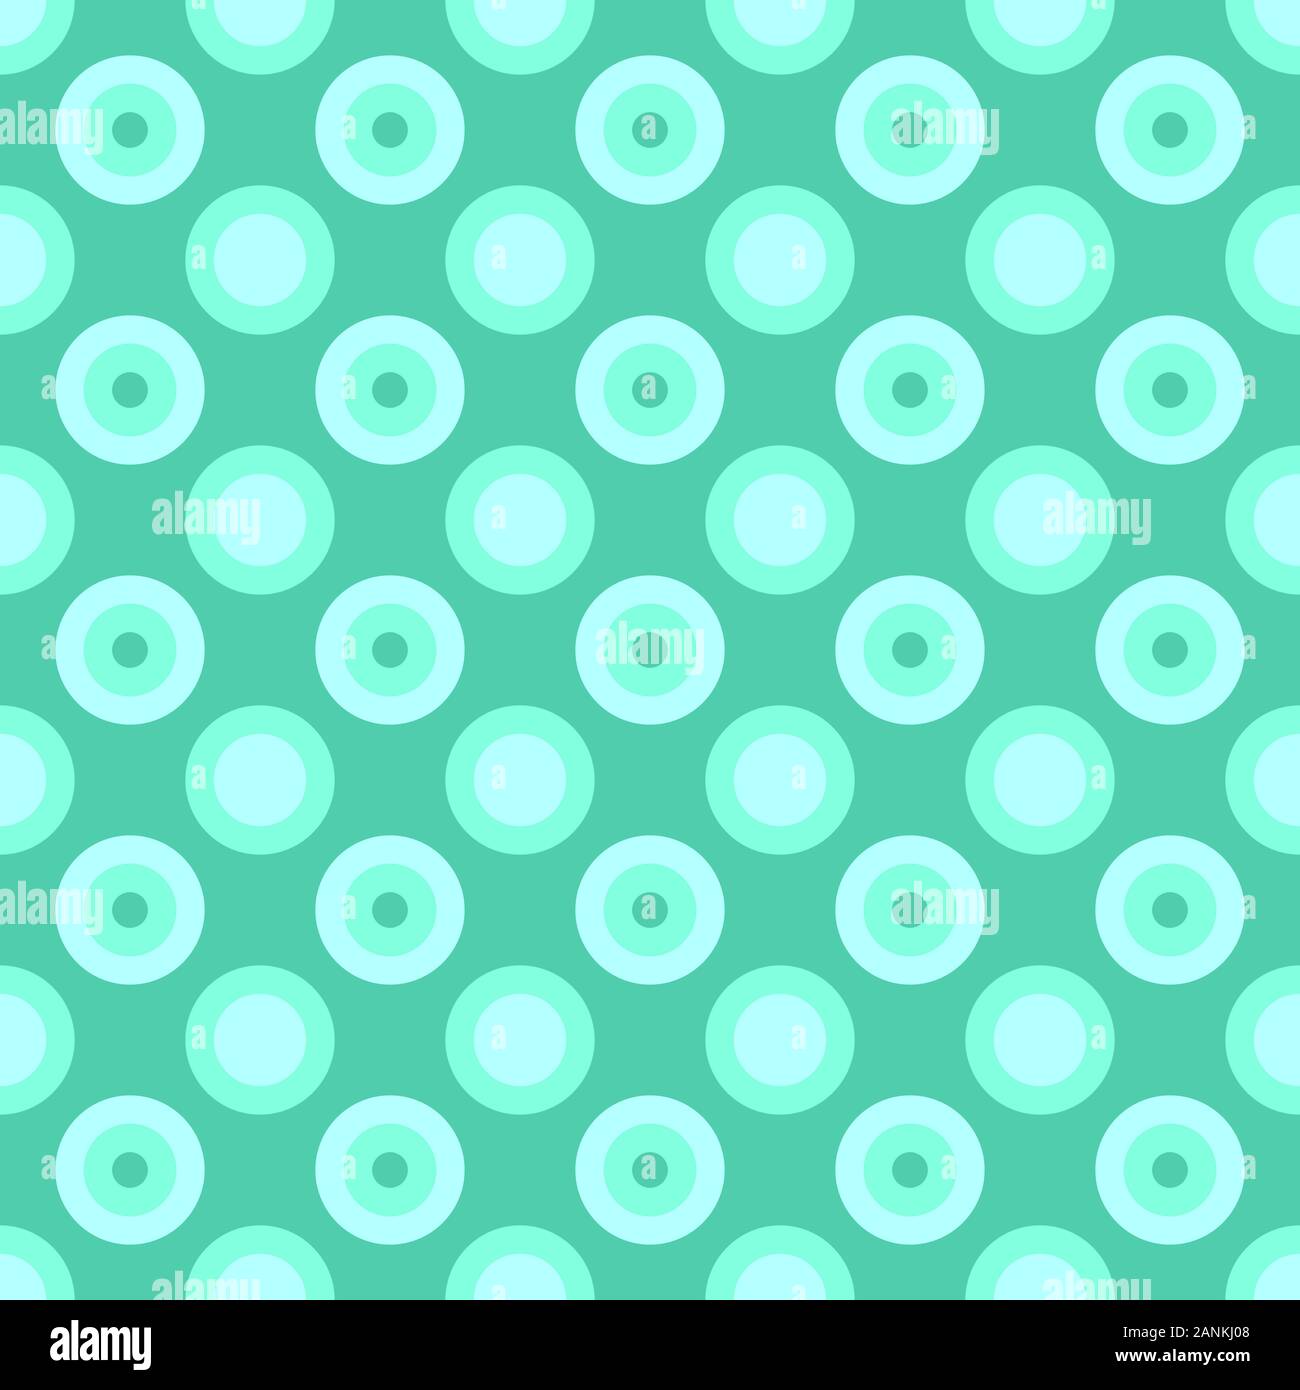 Seamless geometric circle pattern design background - colored vector graphic Stock Vector